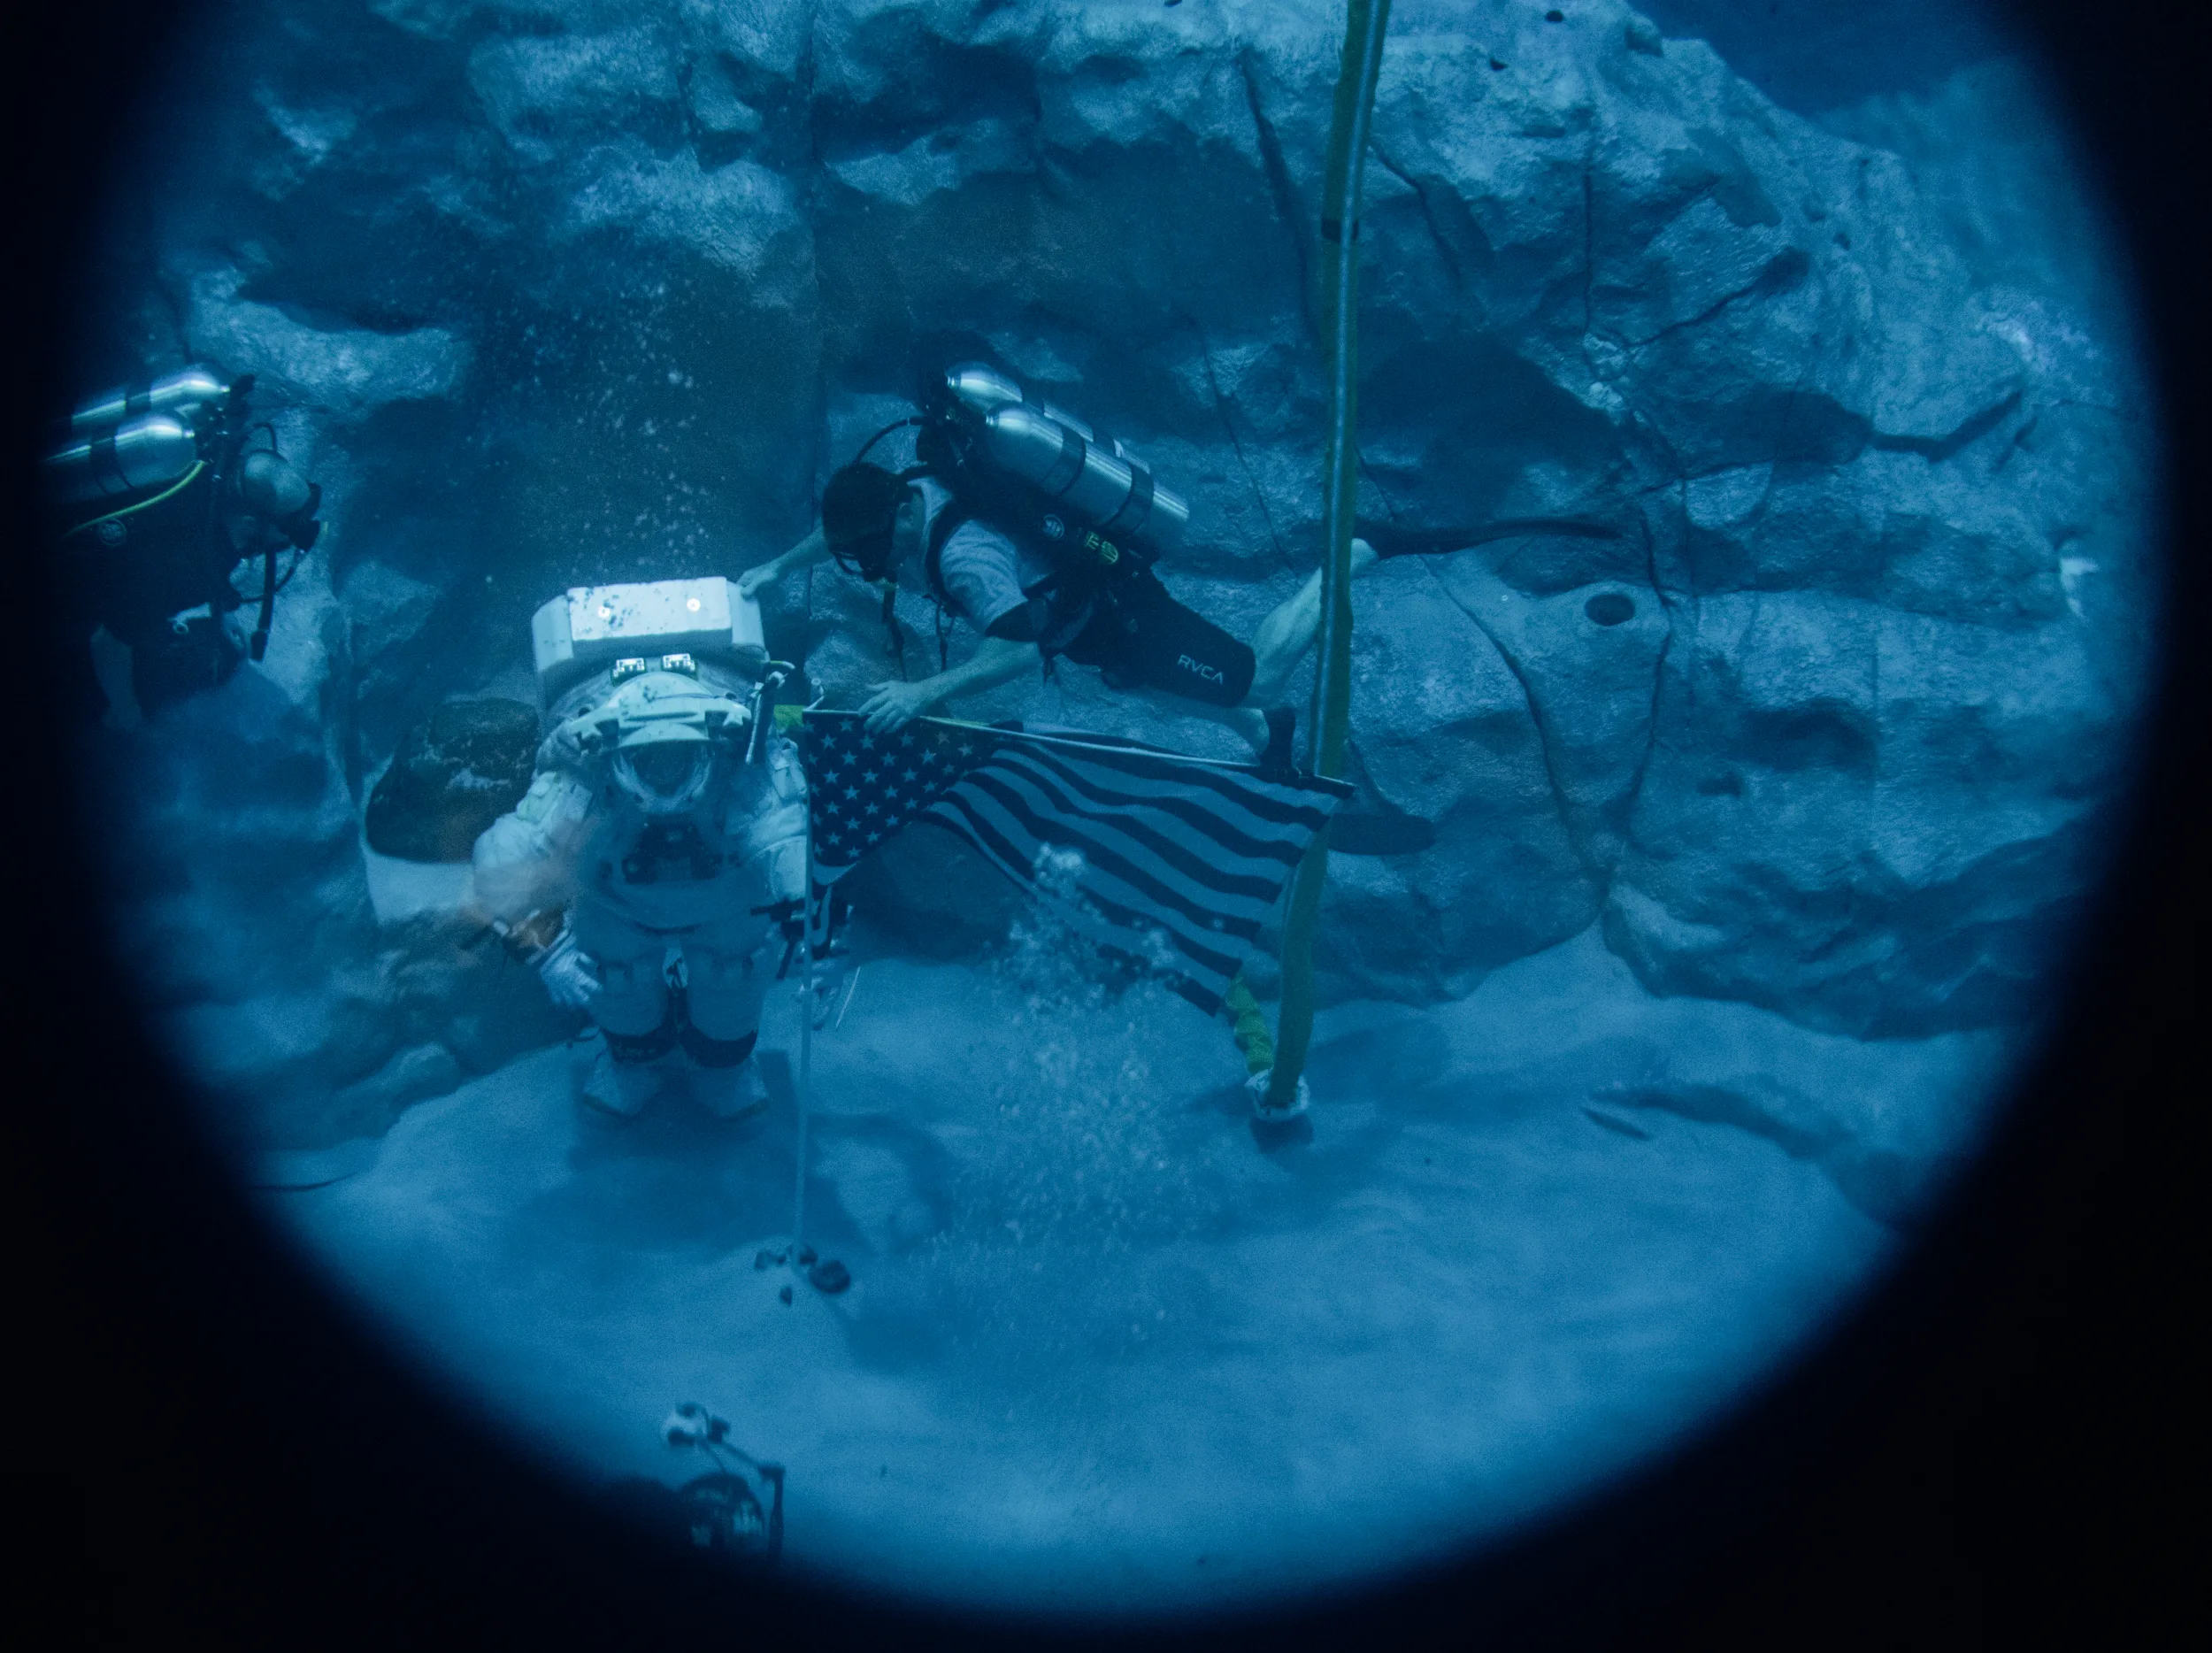 Axiom Space Tests Lunar EVA Suit At Neutral Buoyancy Lab In Houston